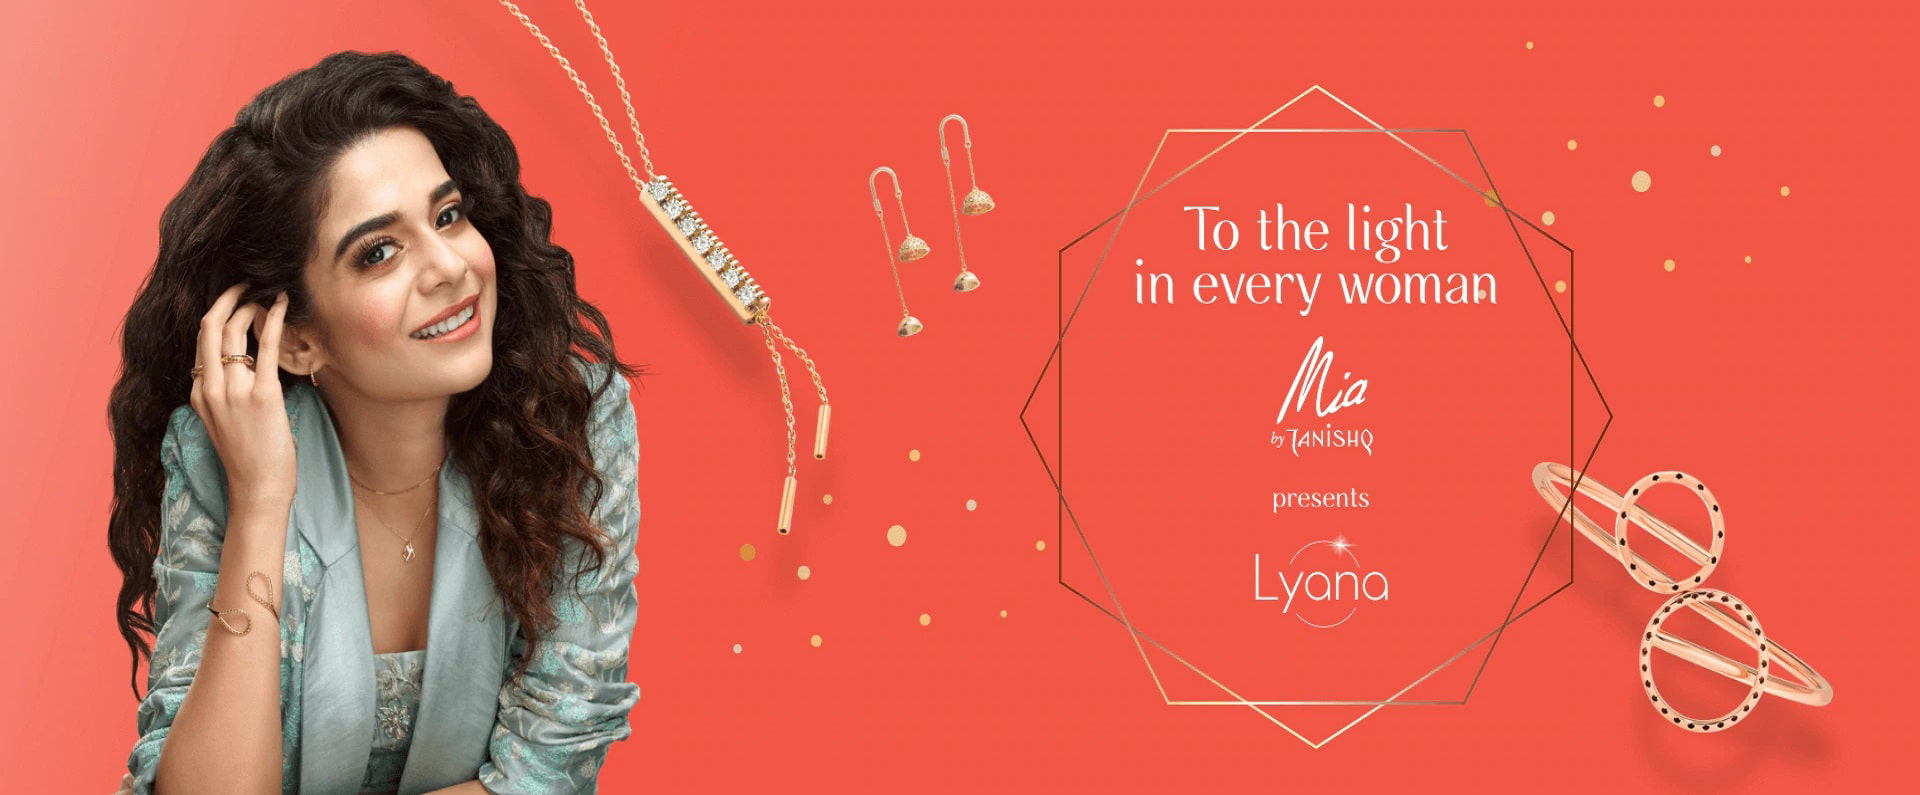 To the light in every women mia by tanishq presents lyana